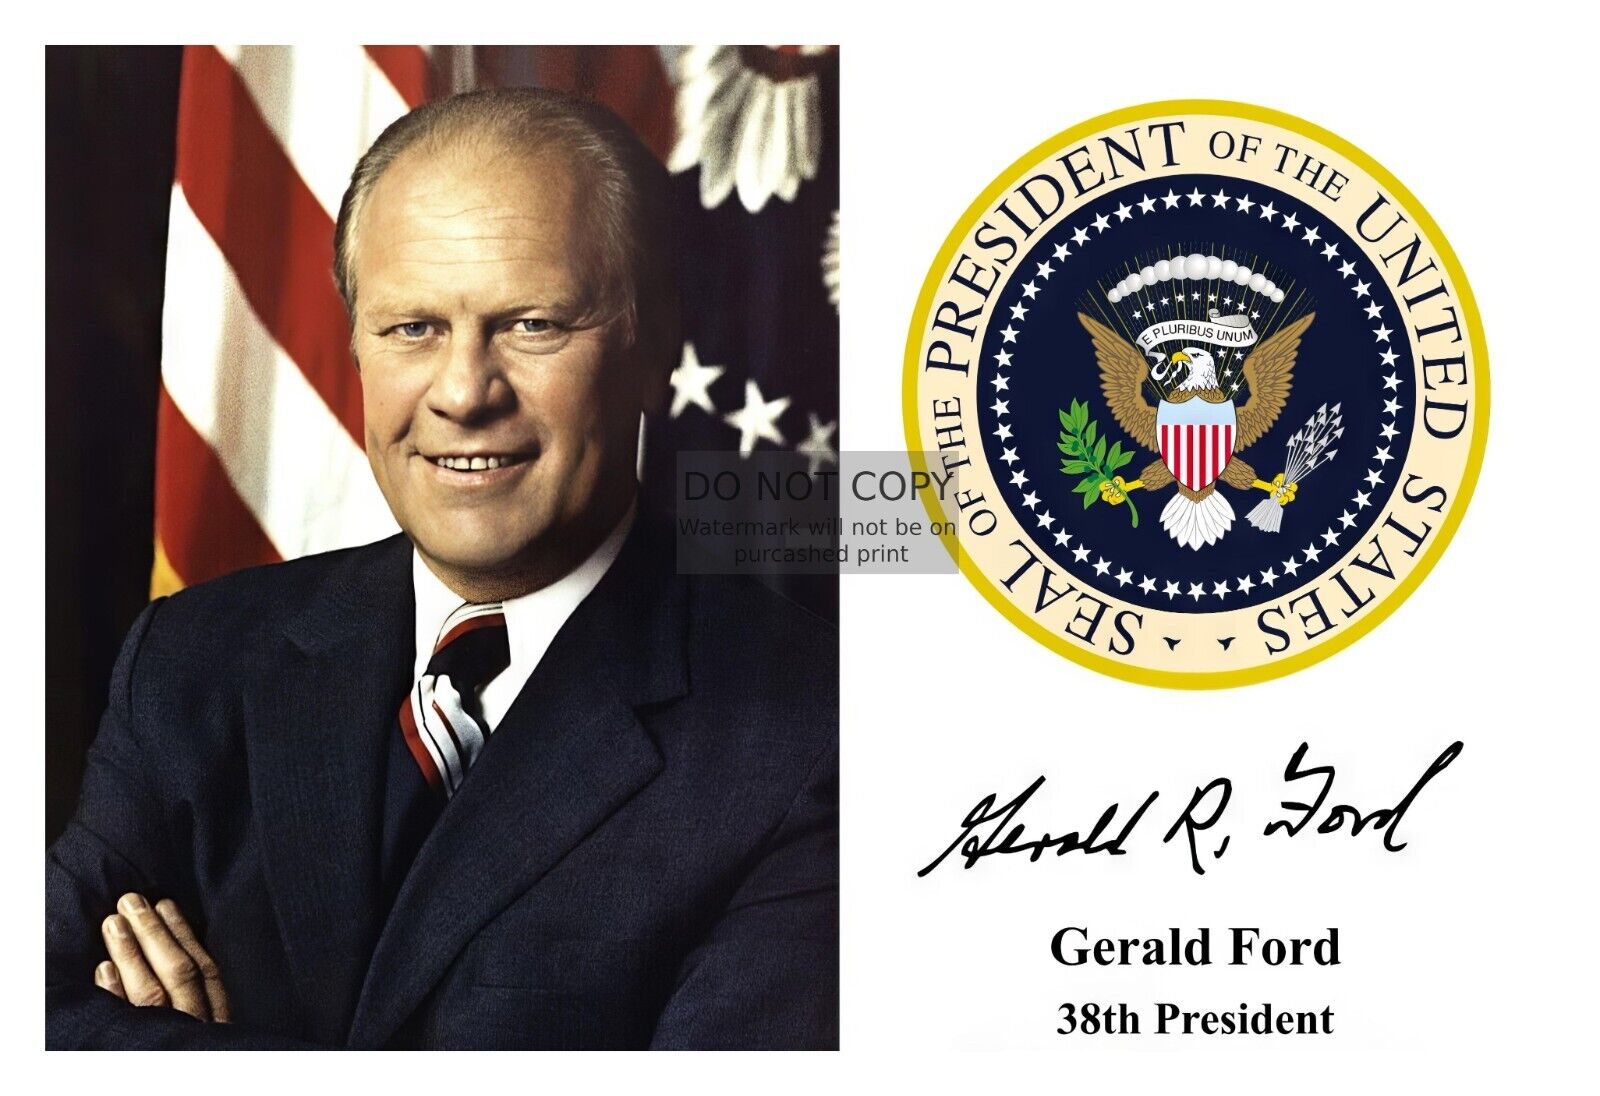 PRESIDENT GERALD FORD PRESIDENTIAL SEAL AUTOGRAPHED 4X6 PHOTOGRAPH